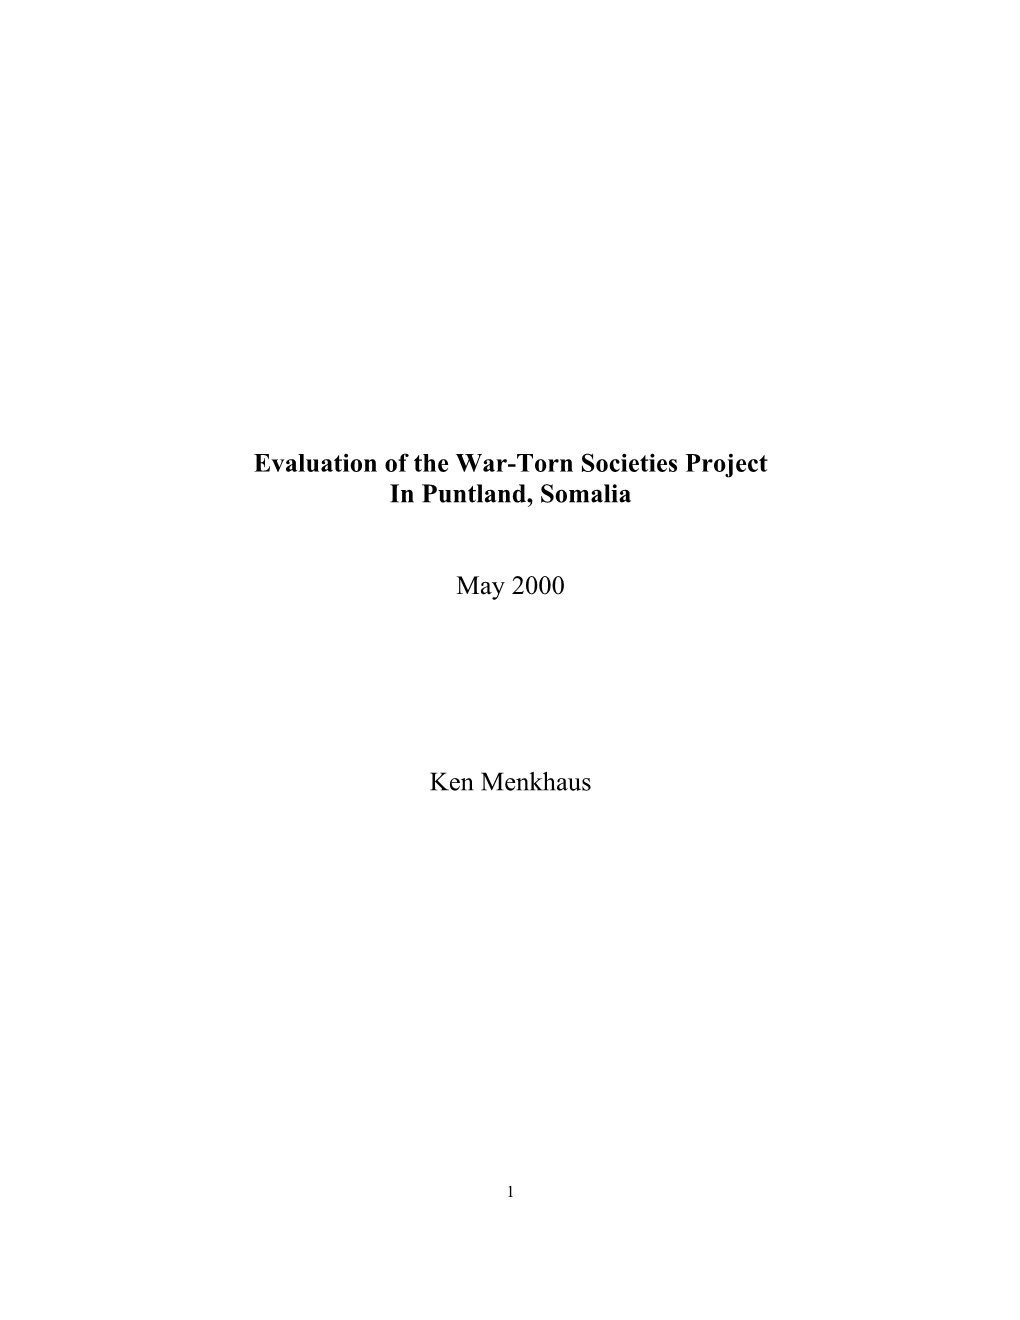 Evaluation of the War-Torn Societies Project in Puntland, Somalia